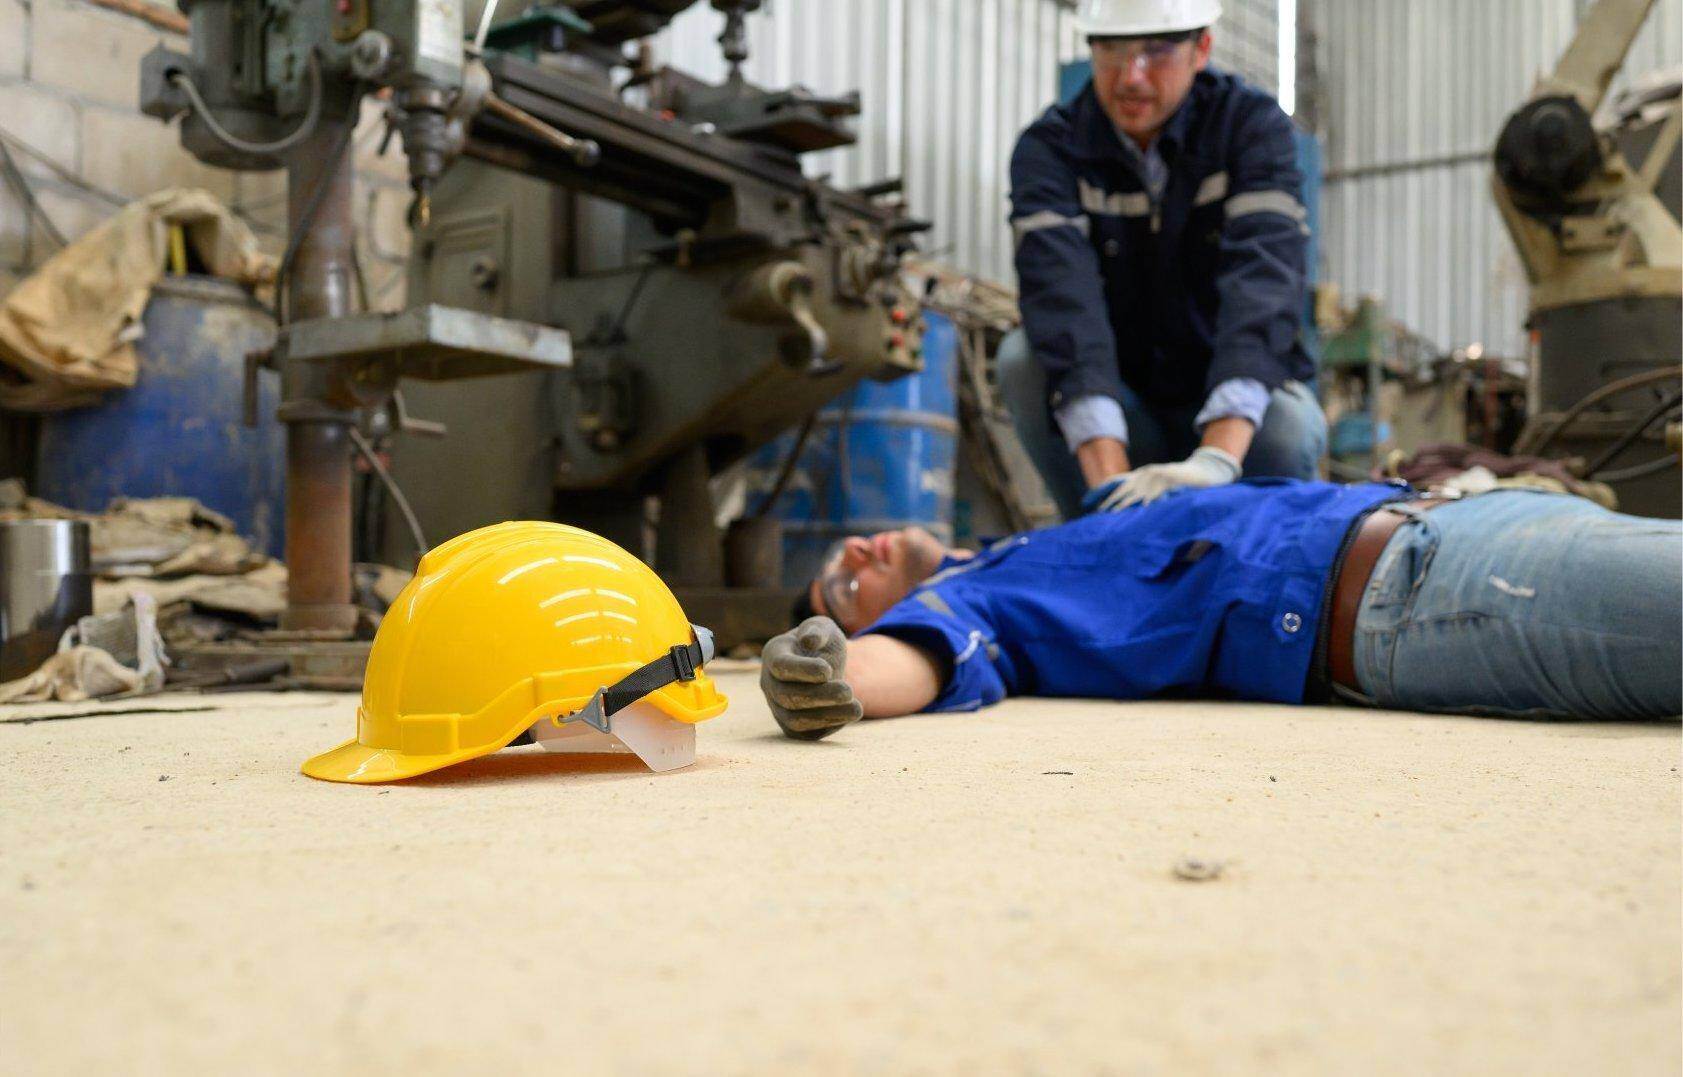 An unconscious man who has been injured on the job who will file for workers compensation in Cartersville, Georgia